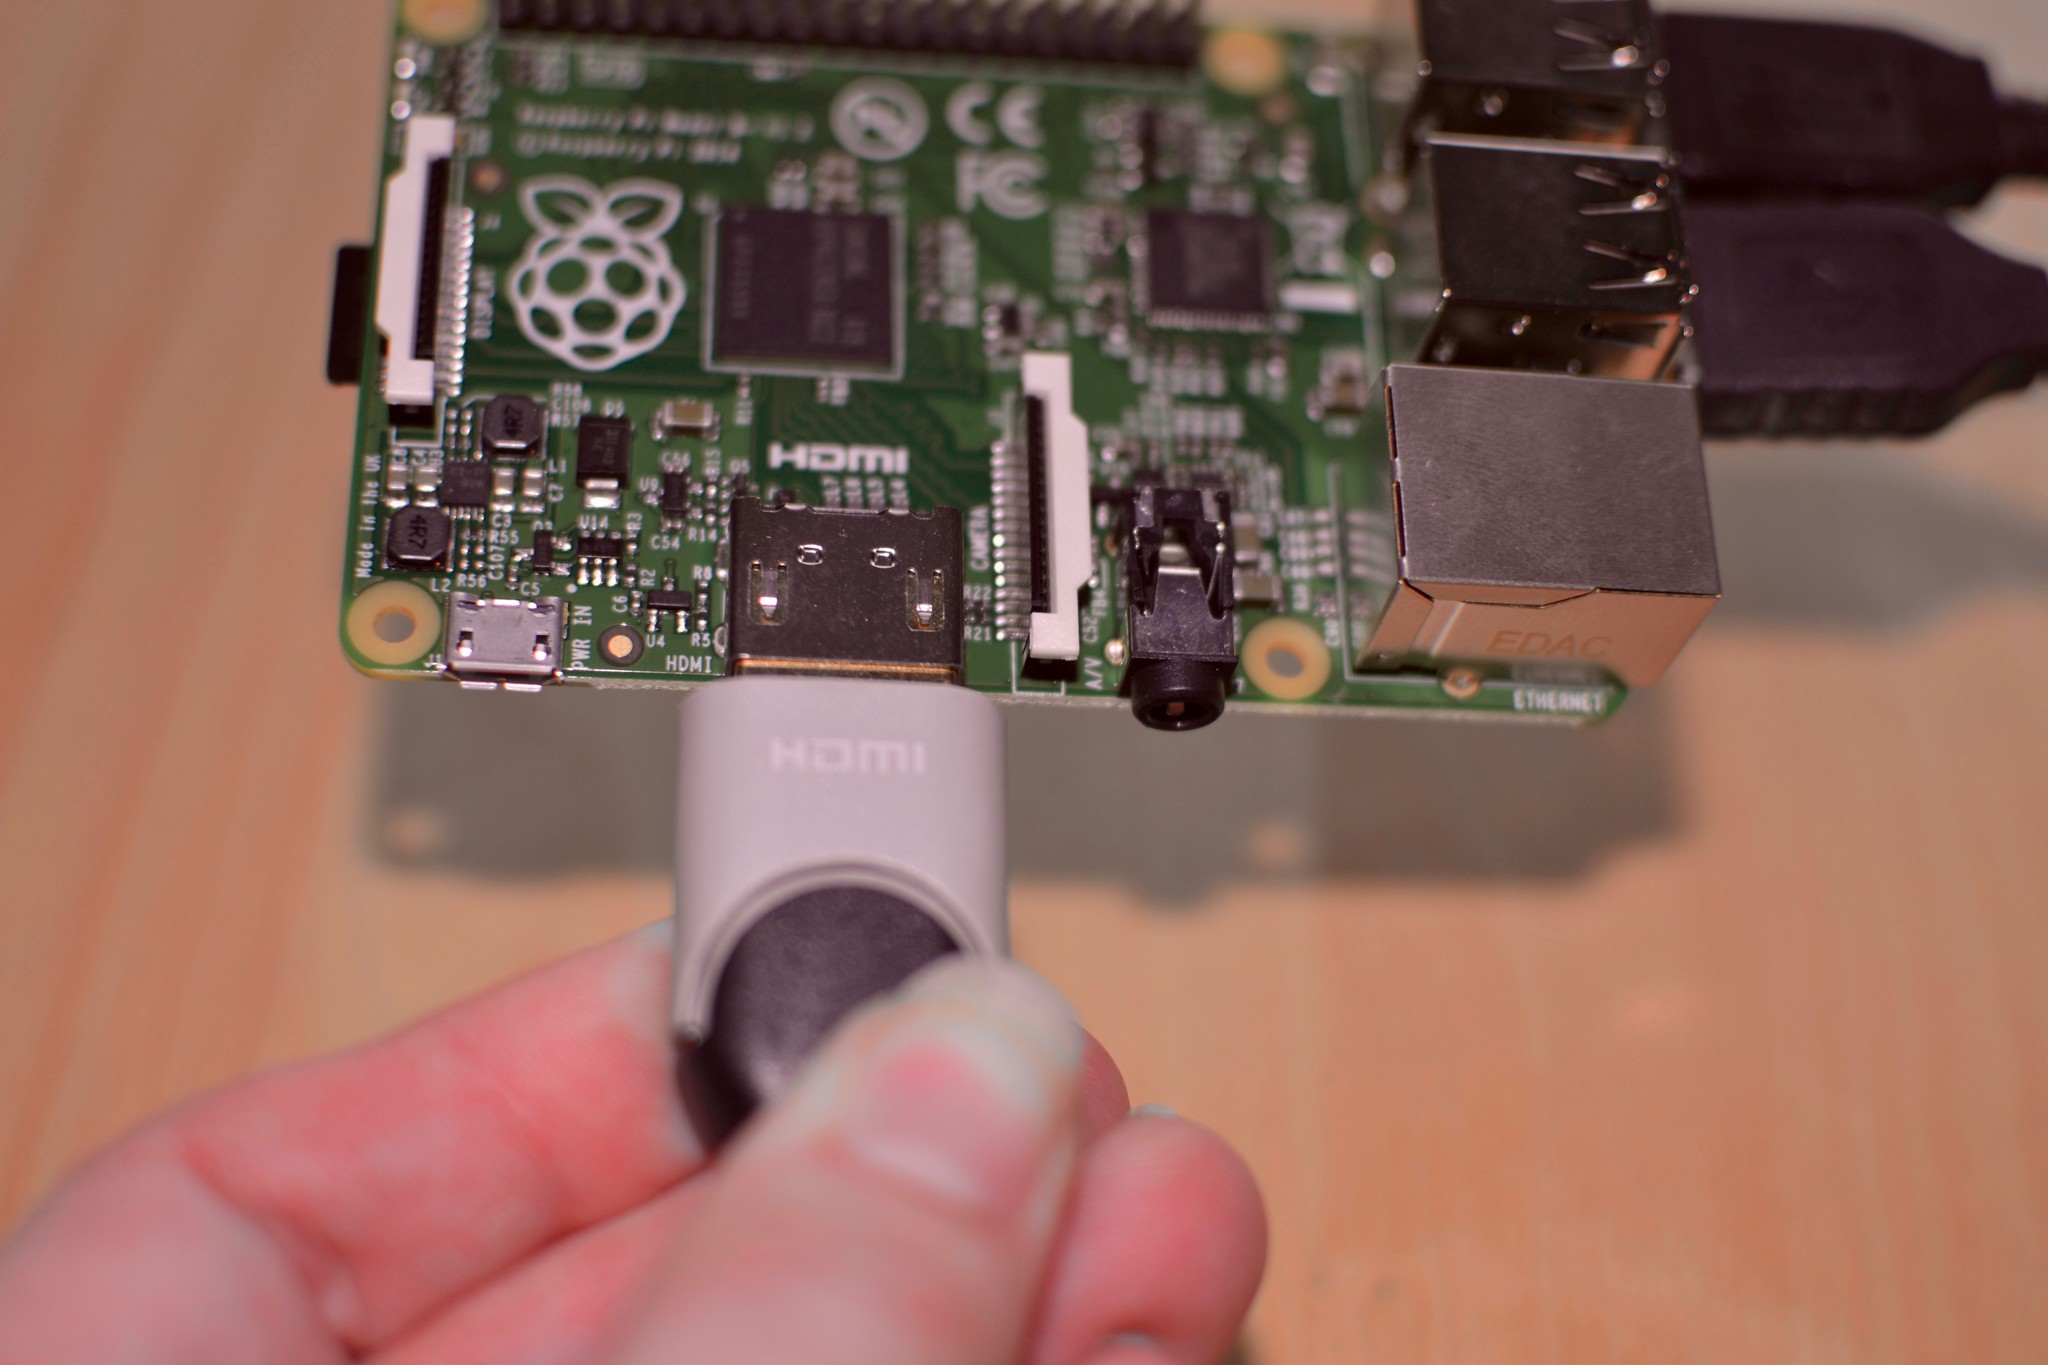 Connecting the HDMI cable to Raspberry Pi